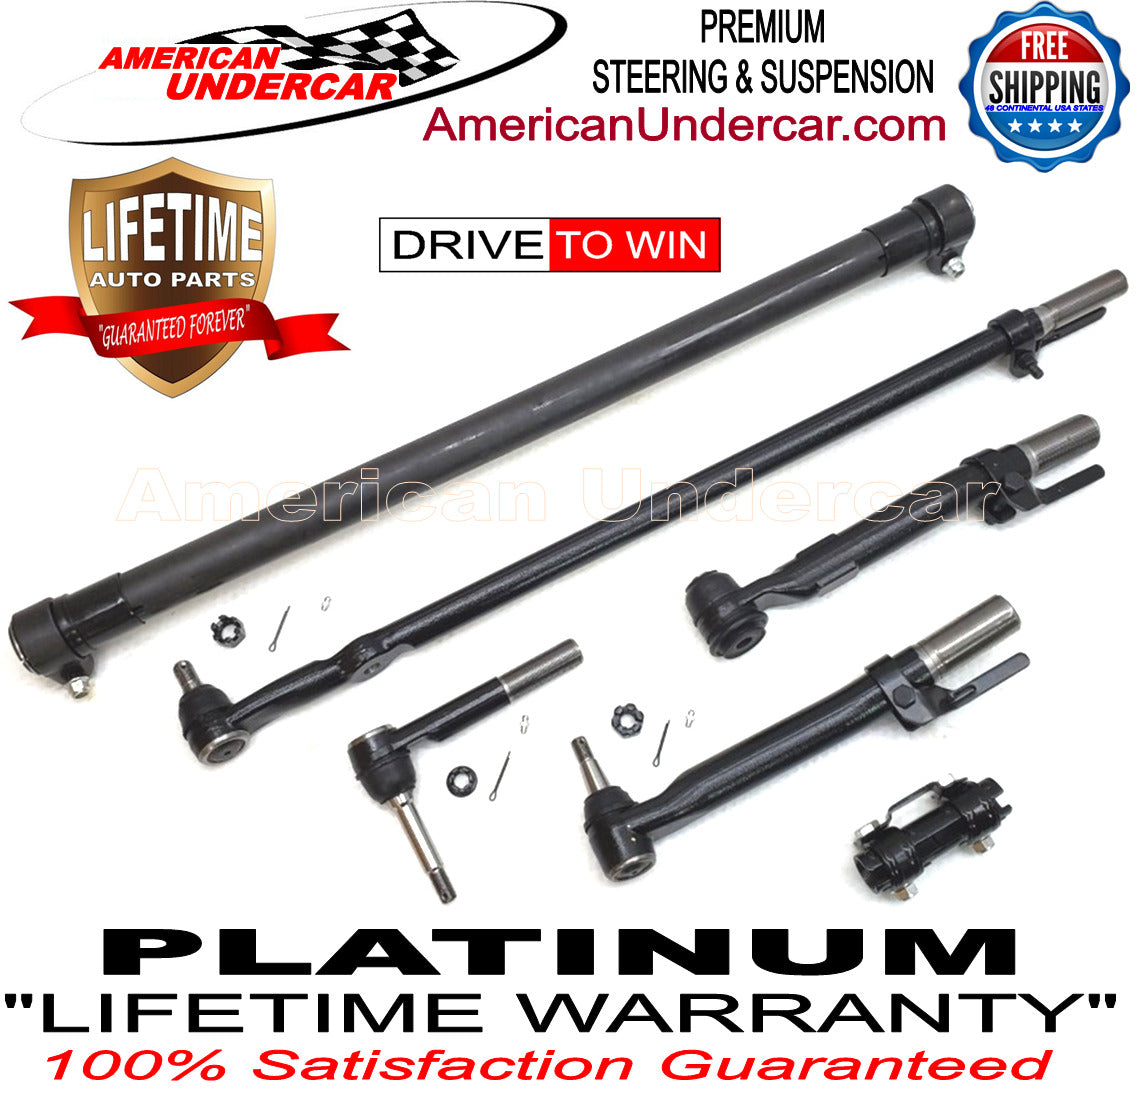 Lifetime Drag Link Tie Rod Sleeve Steering Kit for 2005-2007 Ford F250, F350 Super Duty 4x4